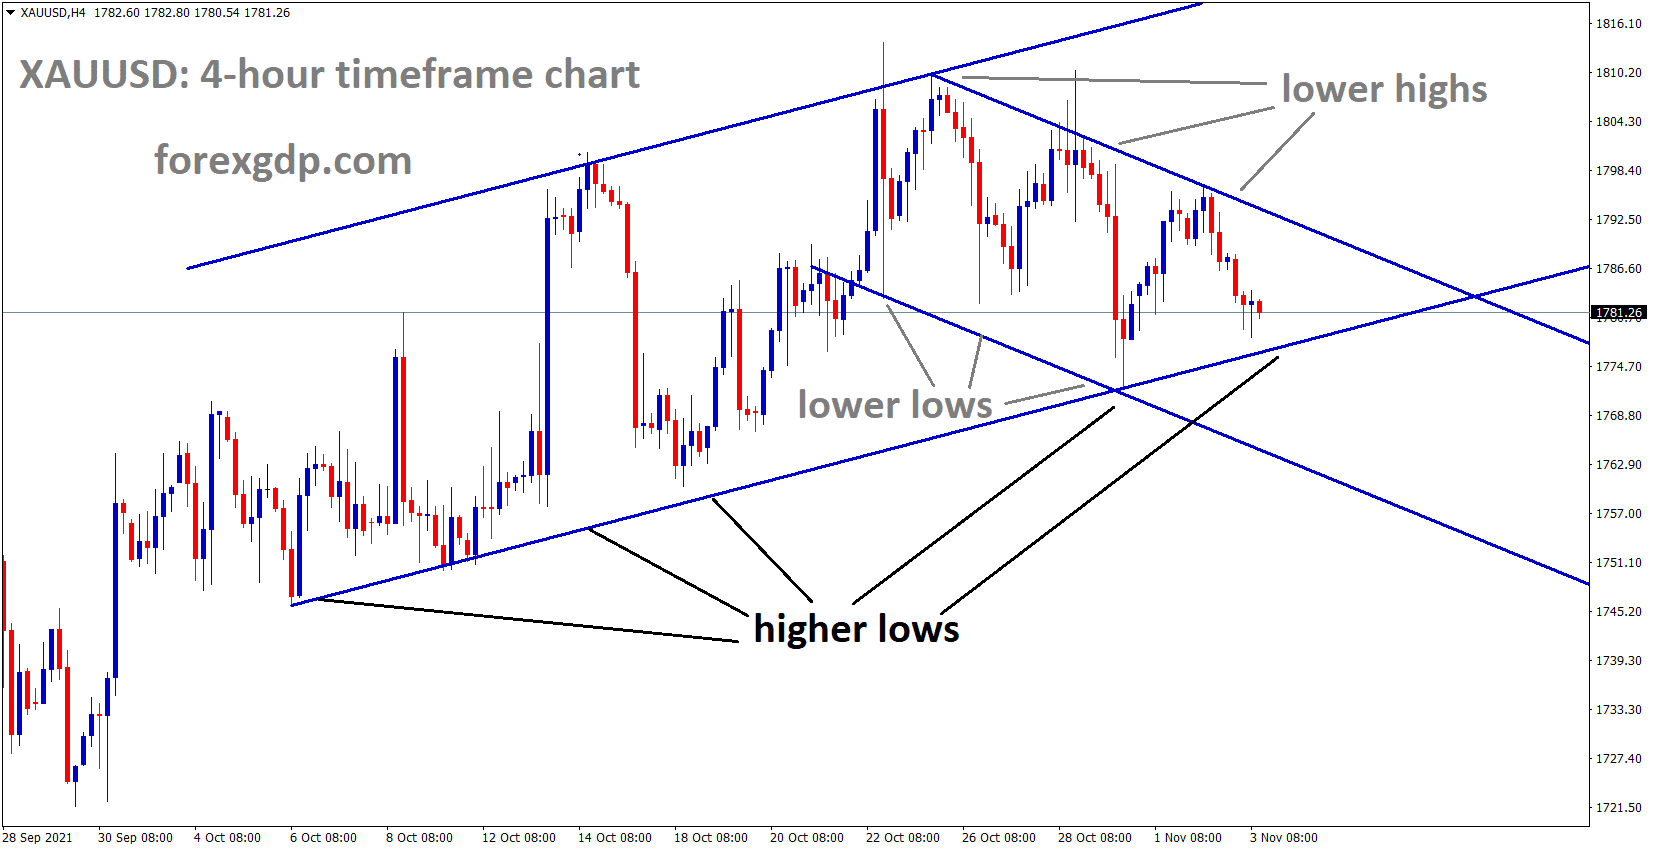 XAUUSD Gold price is moving in an Ascending channel and the market reached the higher low area